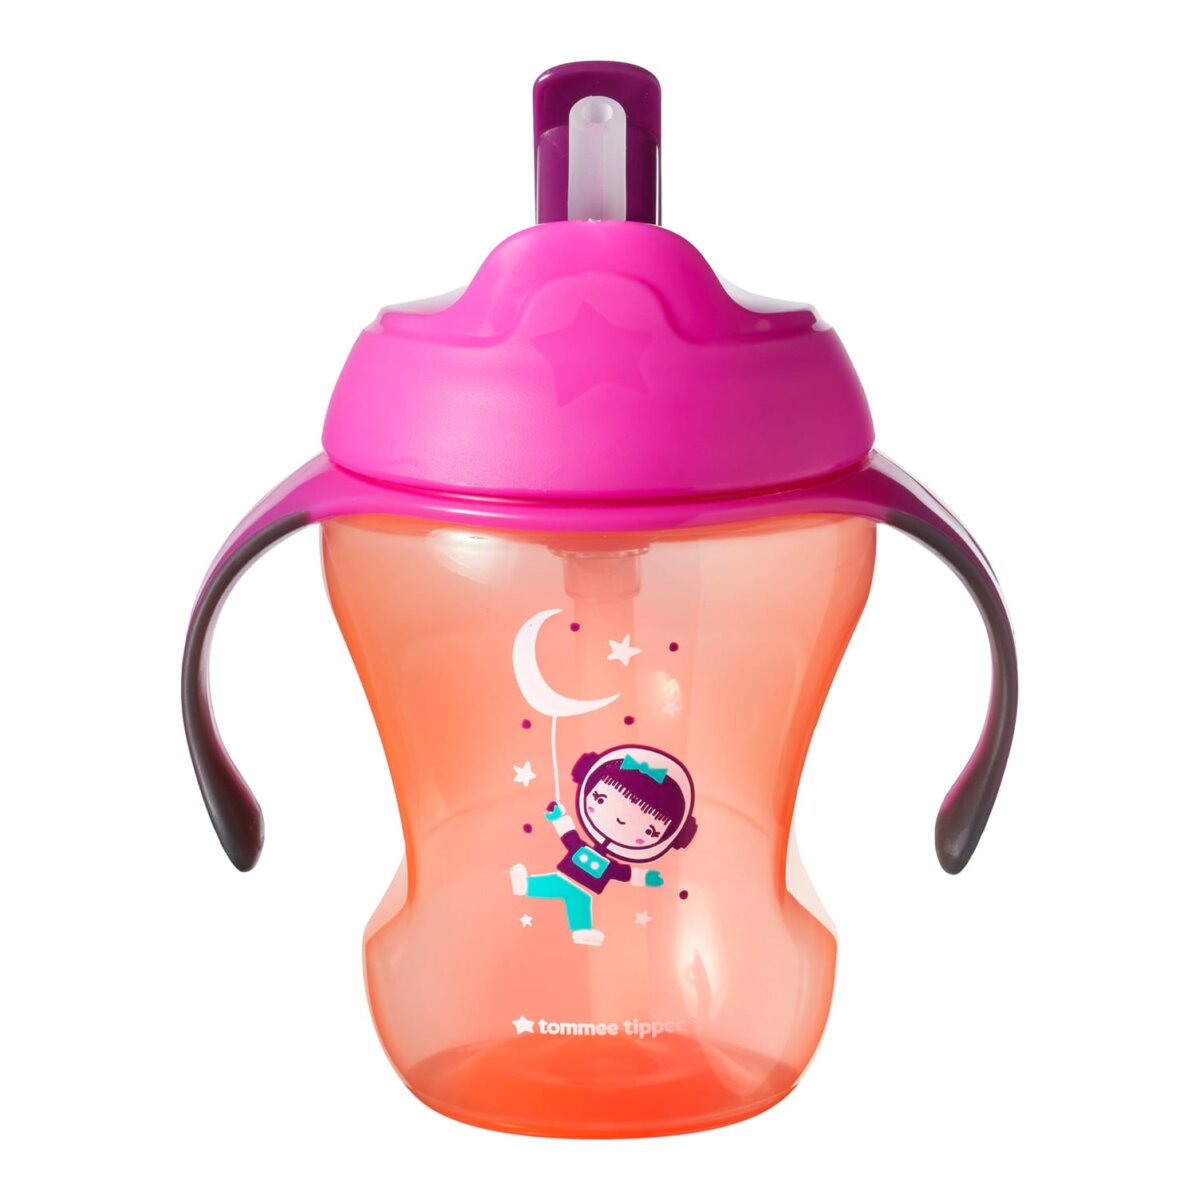 tommee-tippee-easy-drink-%ce%ba%cf%8d%cf%80%ce%b5%ce%bb%ce%bb%ce%bf-%ce%bc%ce%b5-%ce%ba%ce%b1%ce%bb%ce%b1%ce%bc%ce%ac%ce%ba%ce%b9-%ce%bb%ce%b1%ce%b2%ce%ad%cf%82-spacegirl-6m-230ml-mamaspharmacy